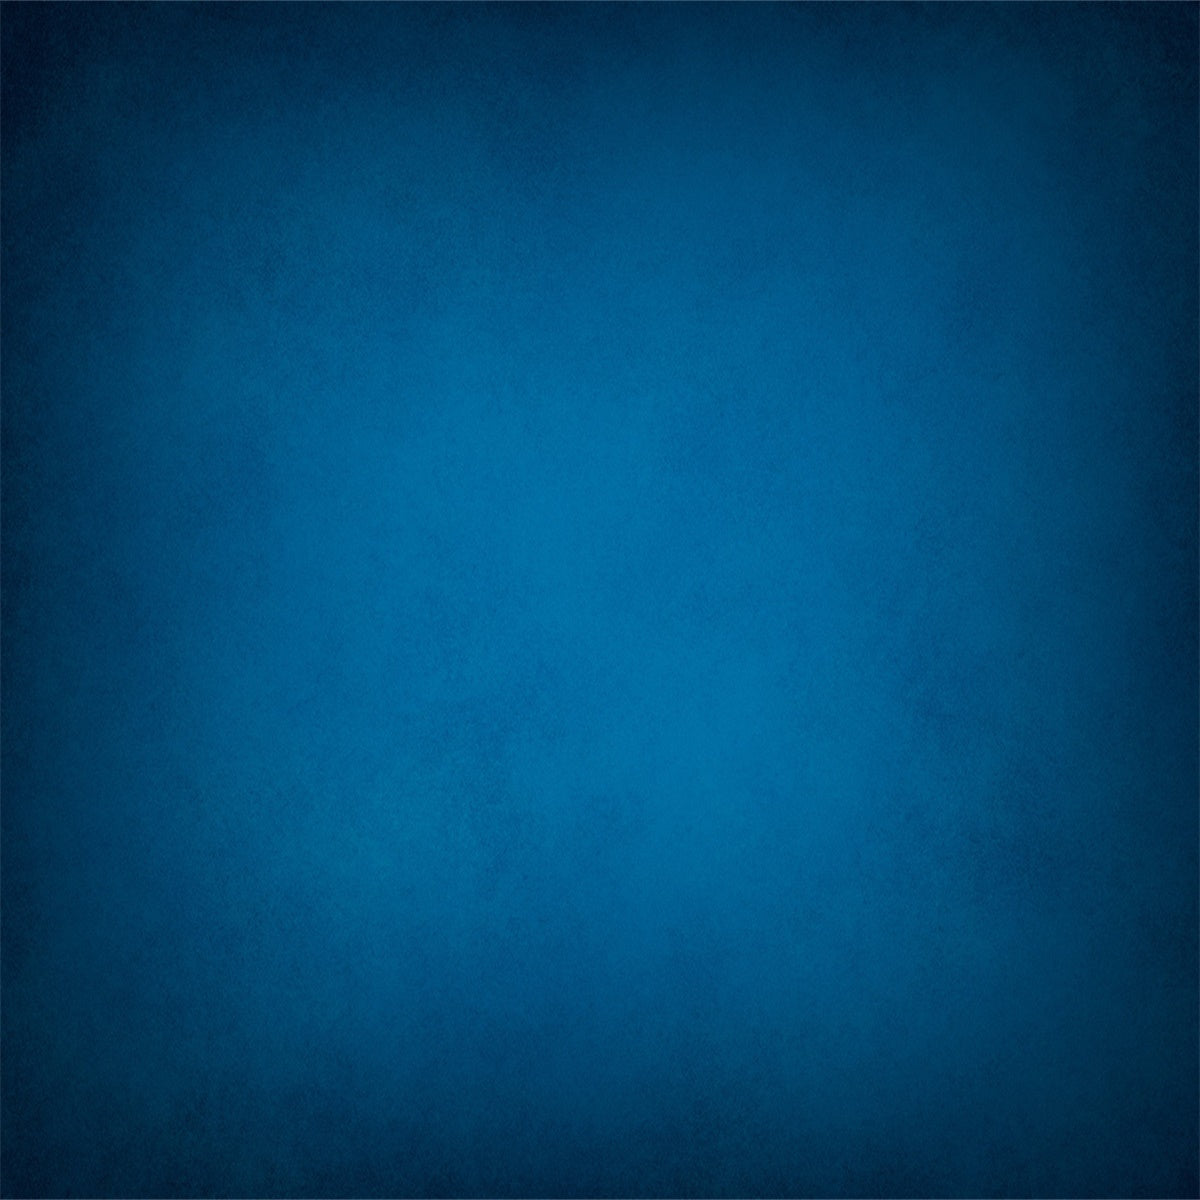 Abstract Blue Wall Photography Backdrops for Picture